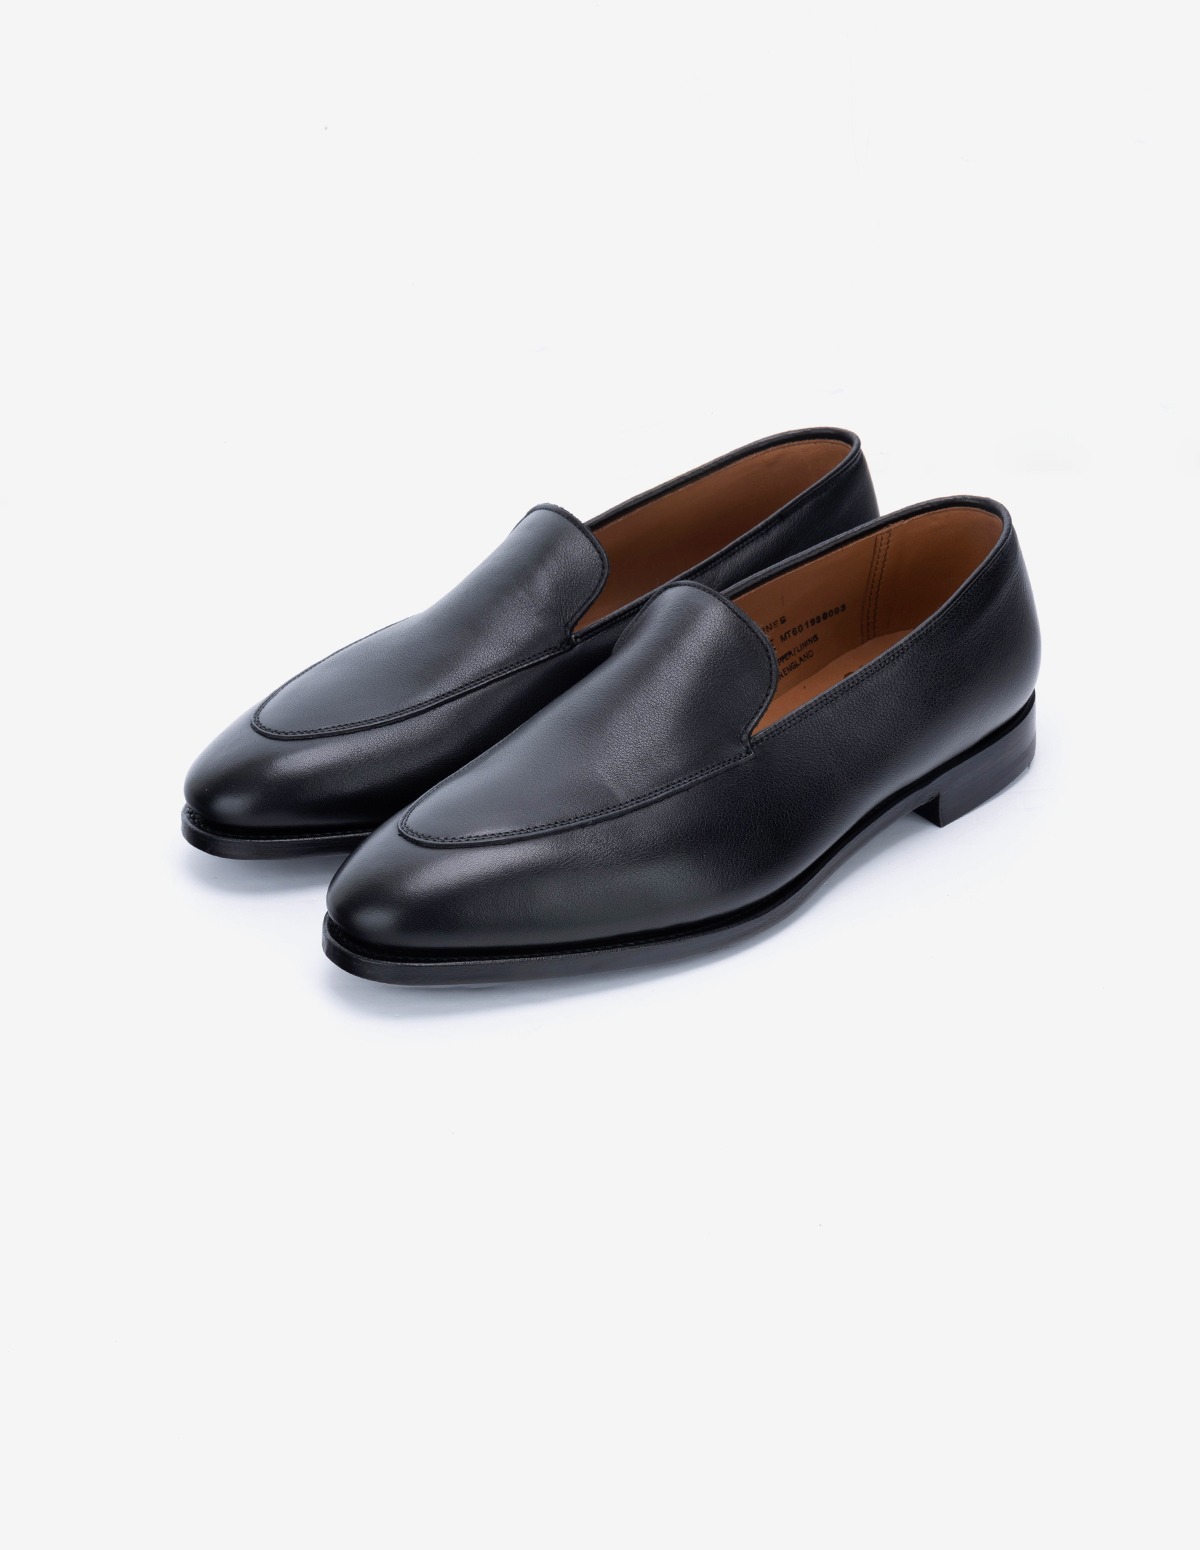 Cannes Milled Calf Black